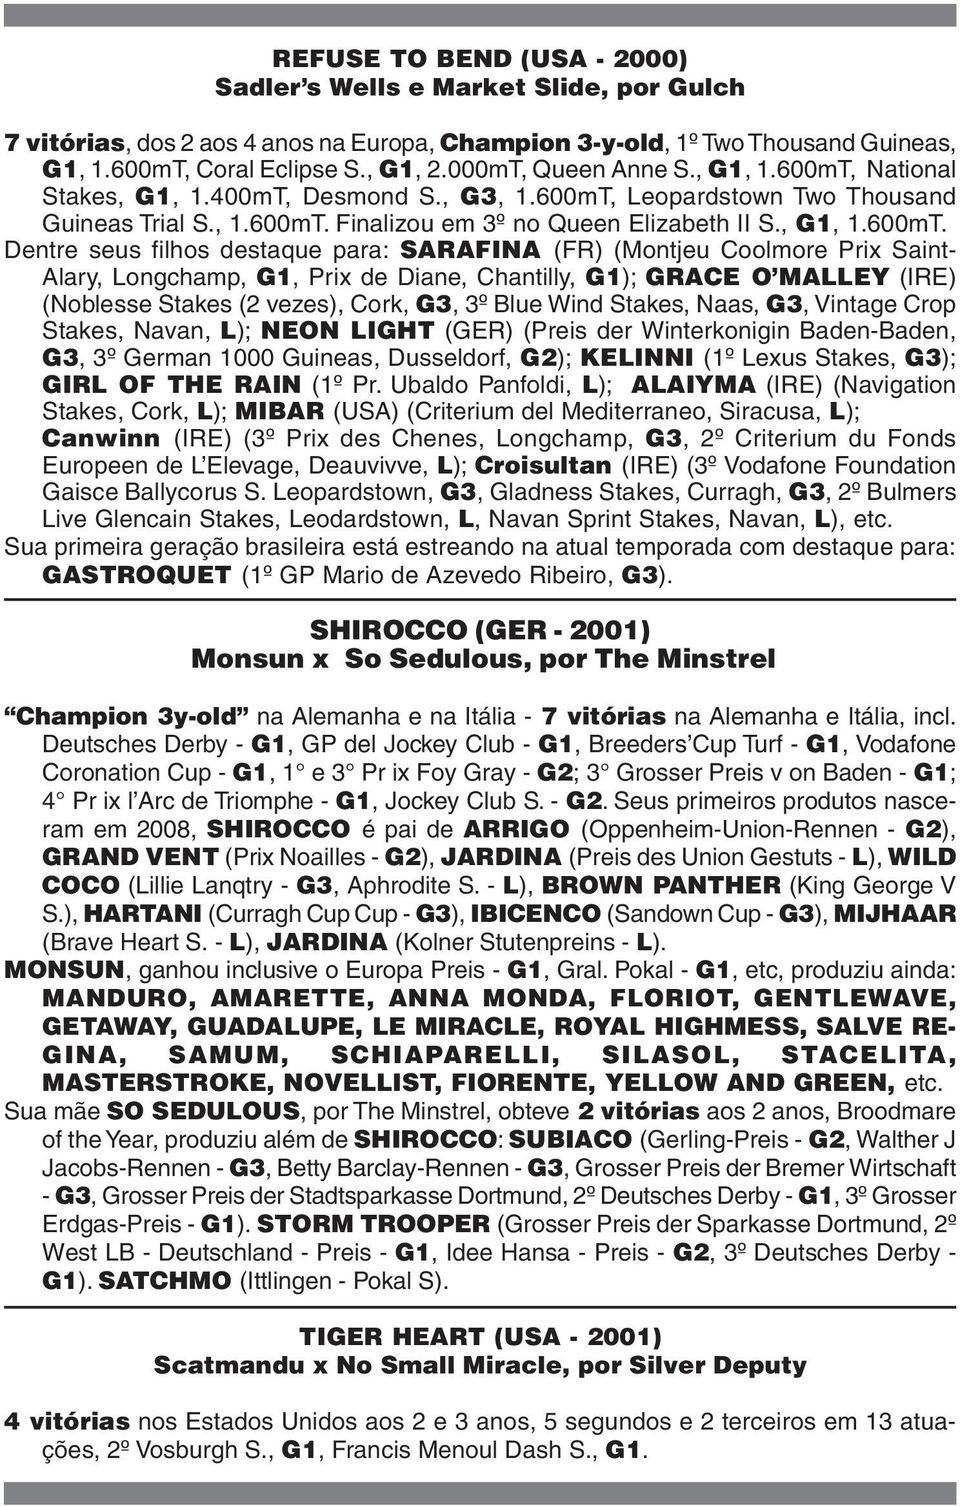 National Stakes, G1, 1.400mT, Desmond S., G3, 1.600mT,